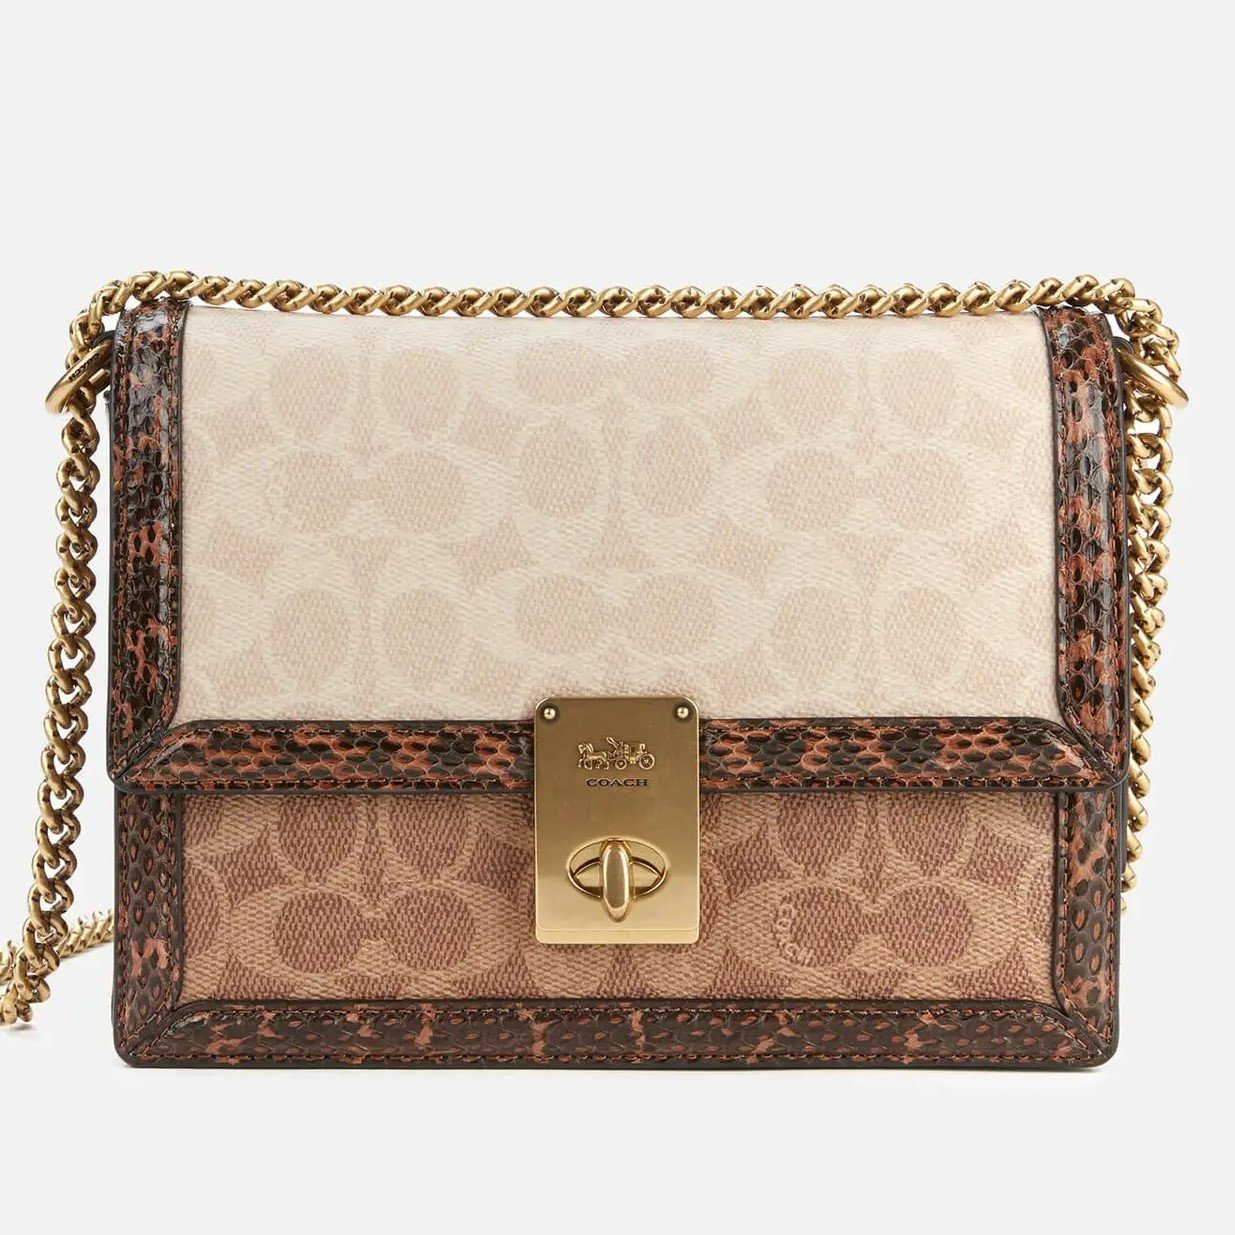 TÚI ĐEO VAI NỮ COACH HUTTON SHOULDER BAG IN BLOCKED SIGNATURE CANVAS WITH SNAKESKIN DETAIL 11